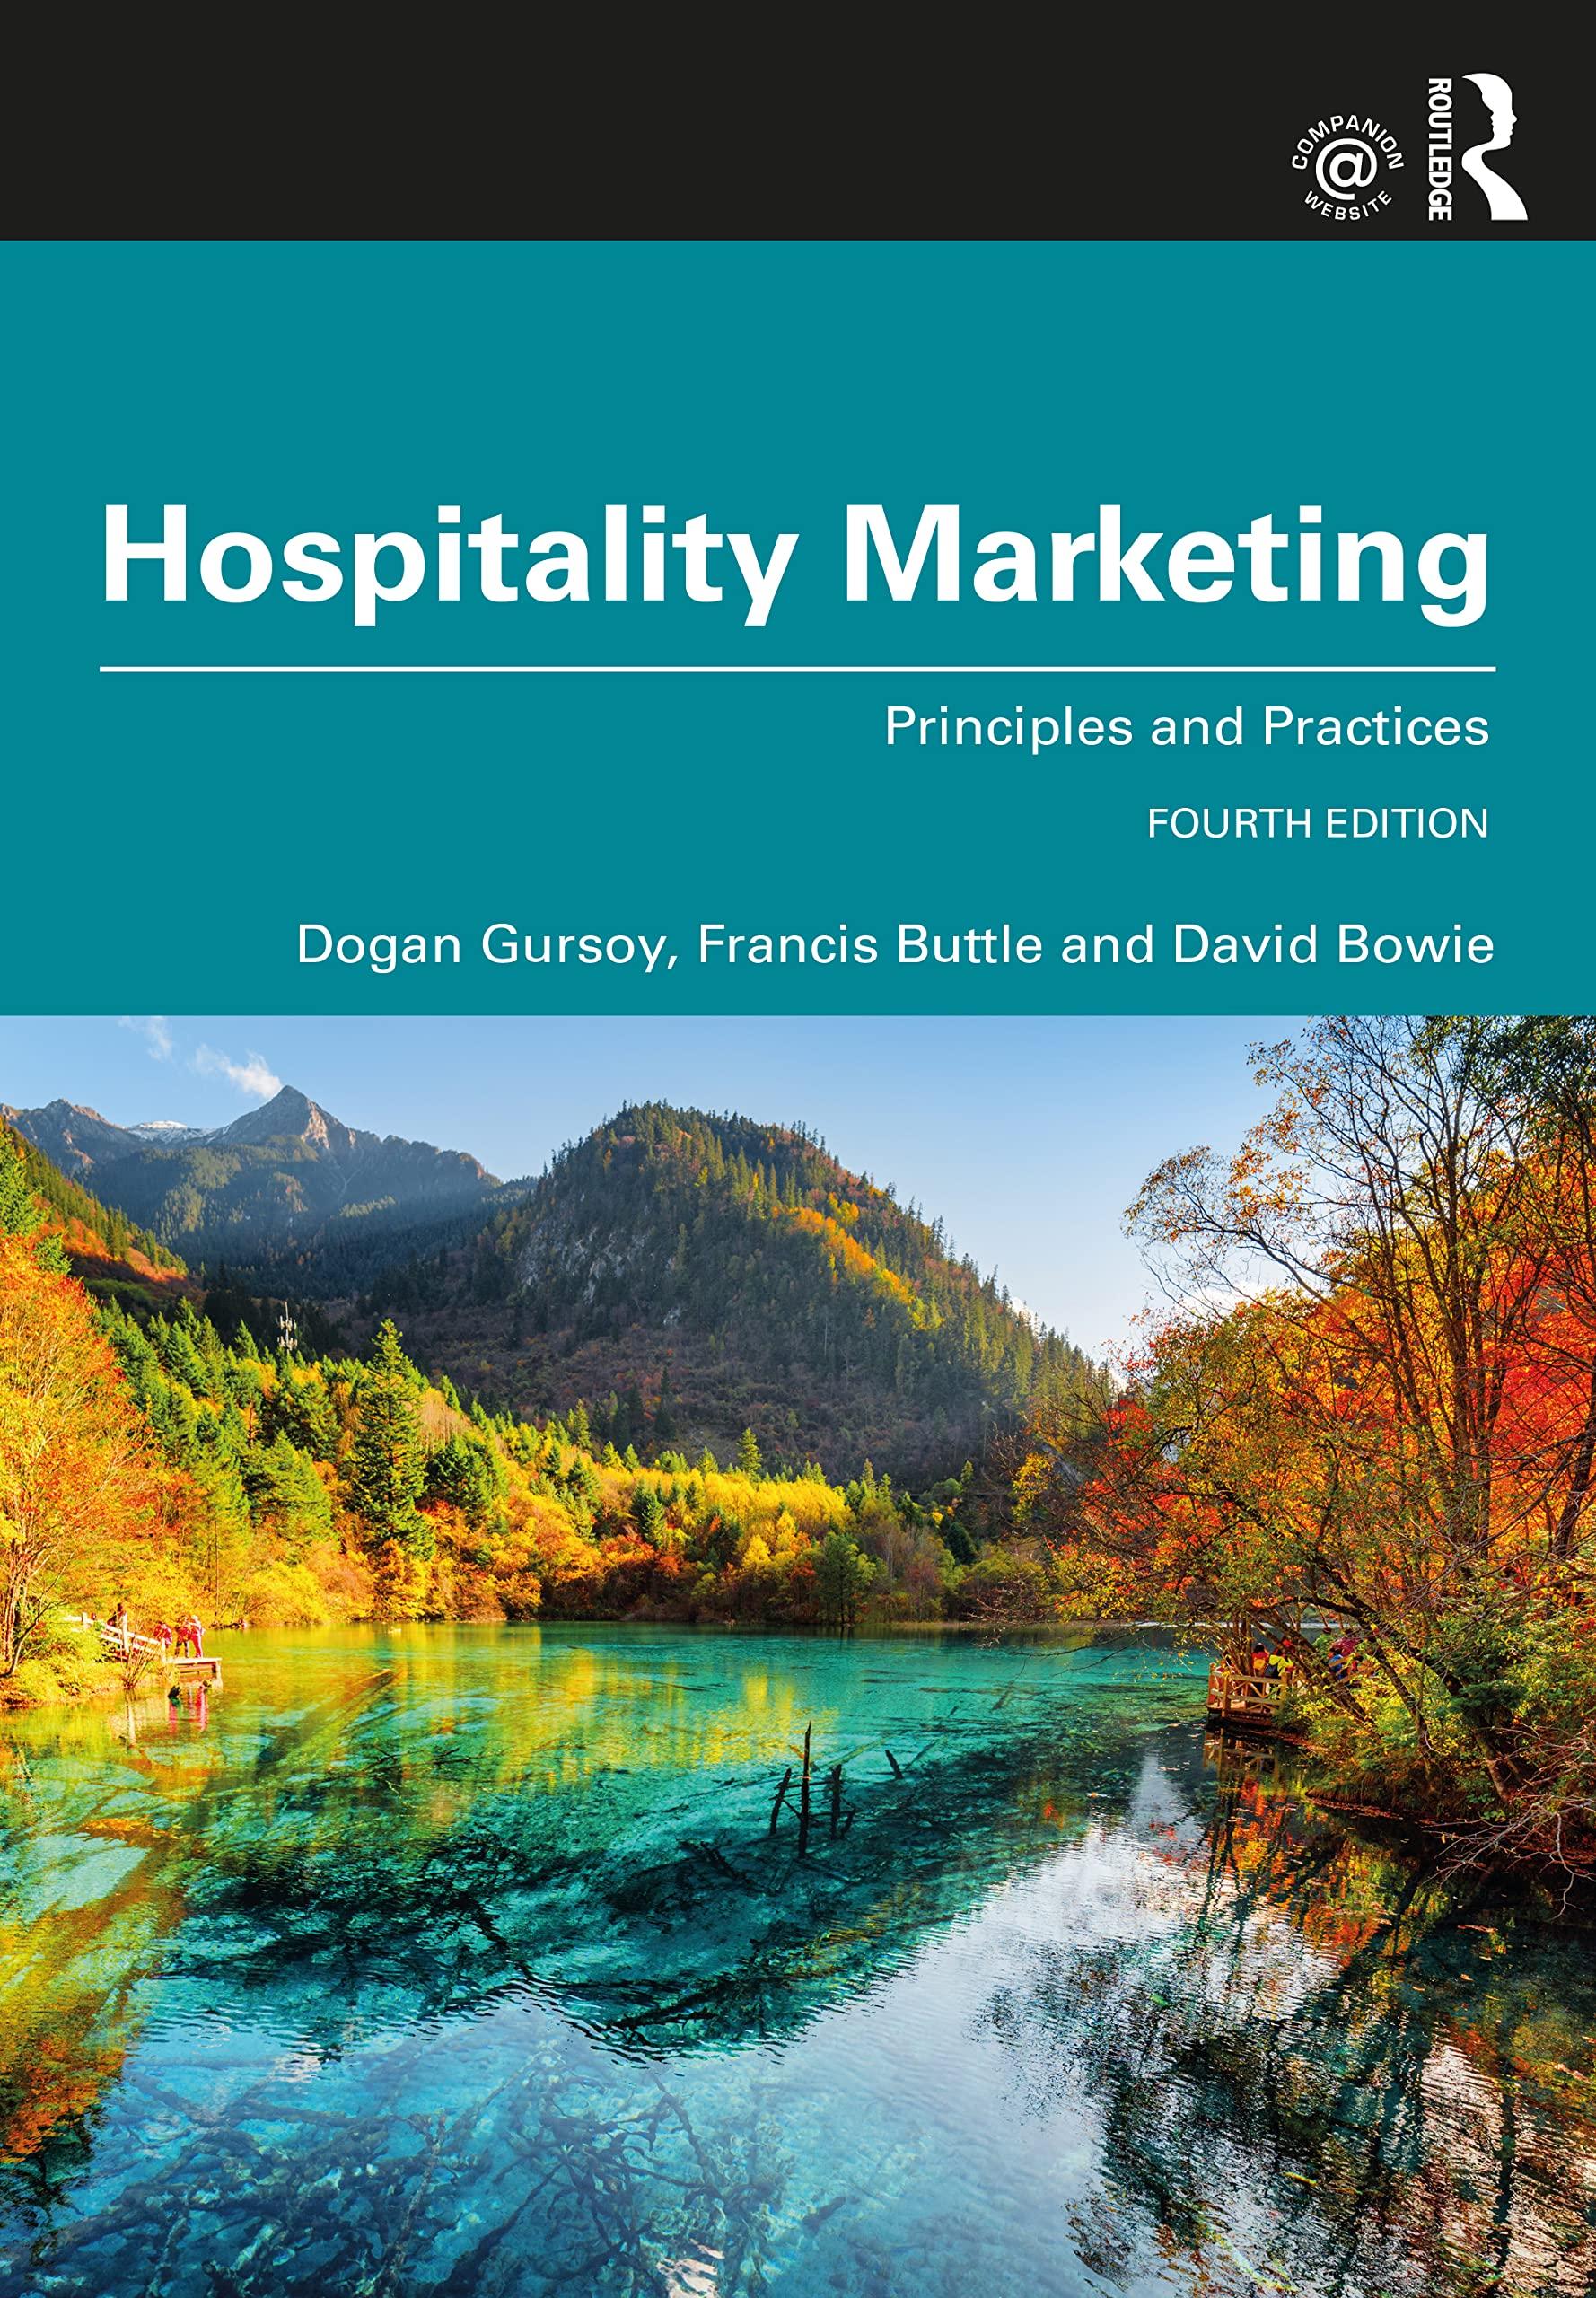 hospitality marketing principles and practices 4th edition dogan gursoy, francis buttle, david bowie